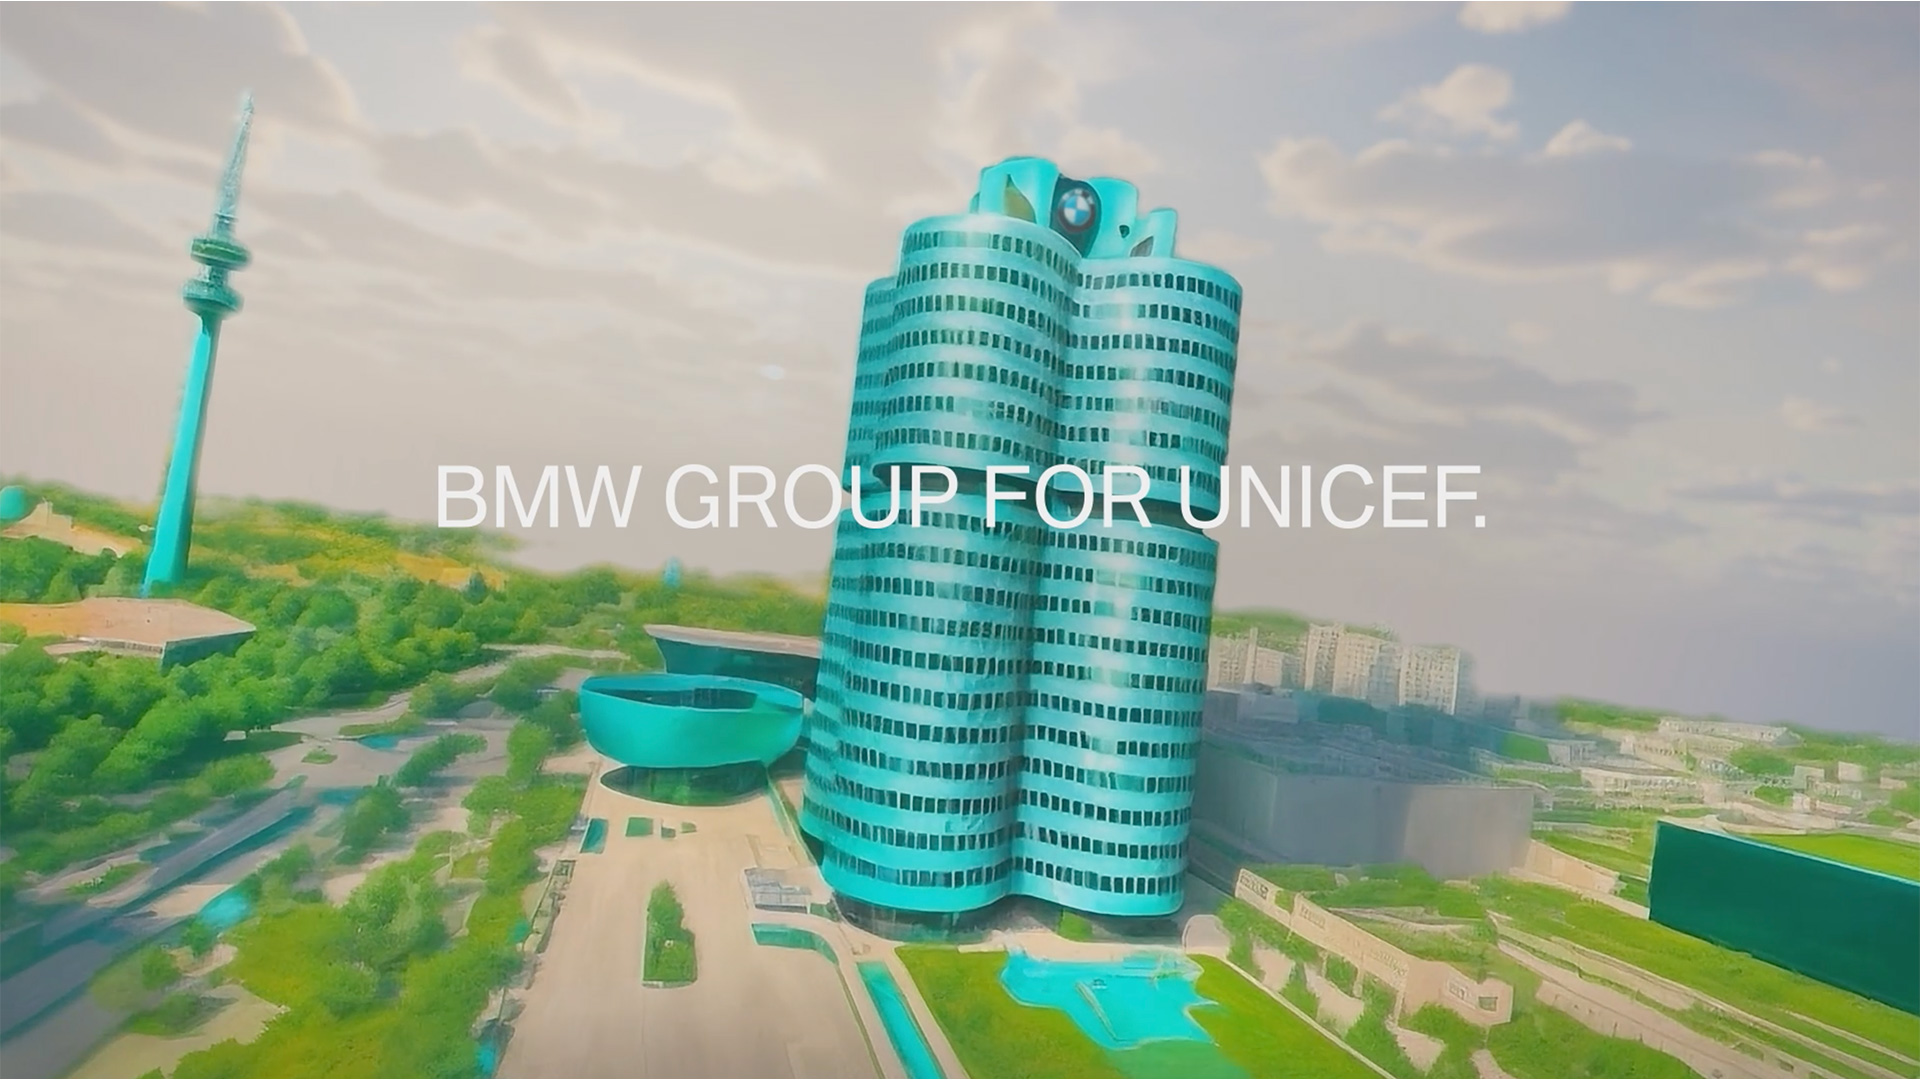 BMW Group for UNICEF